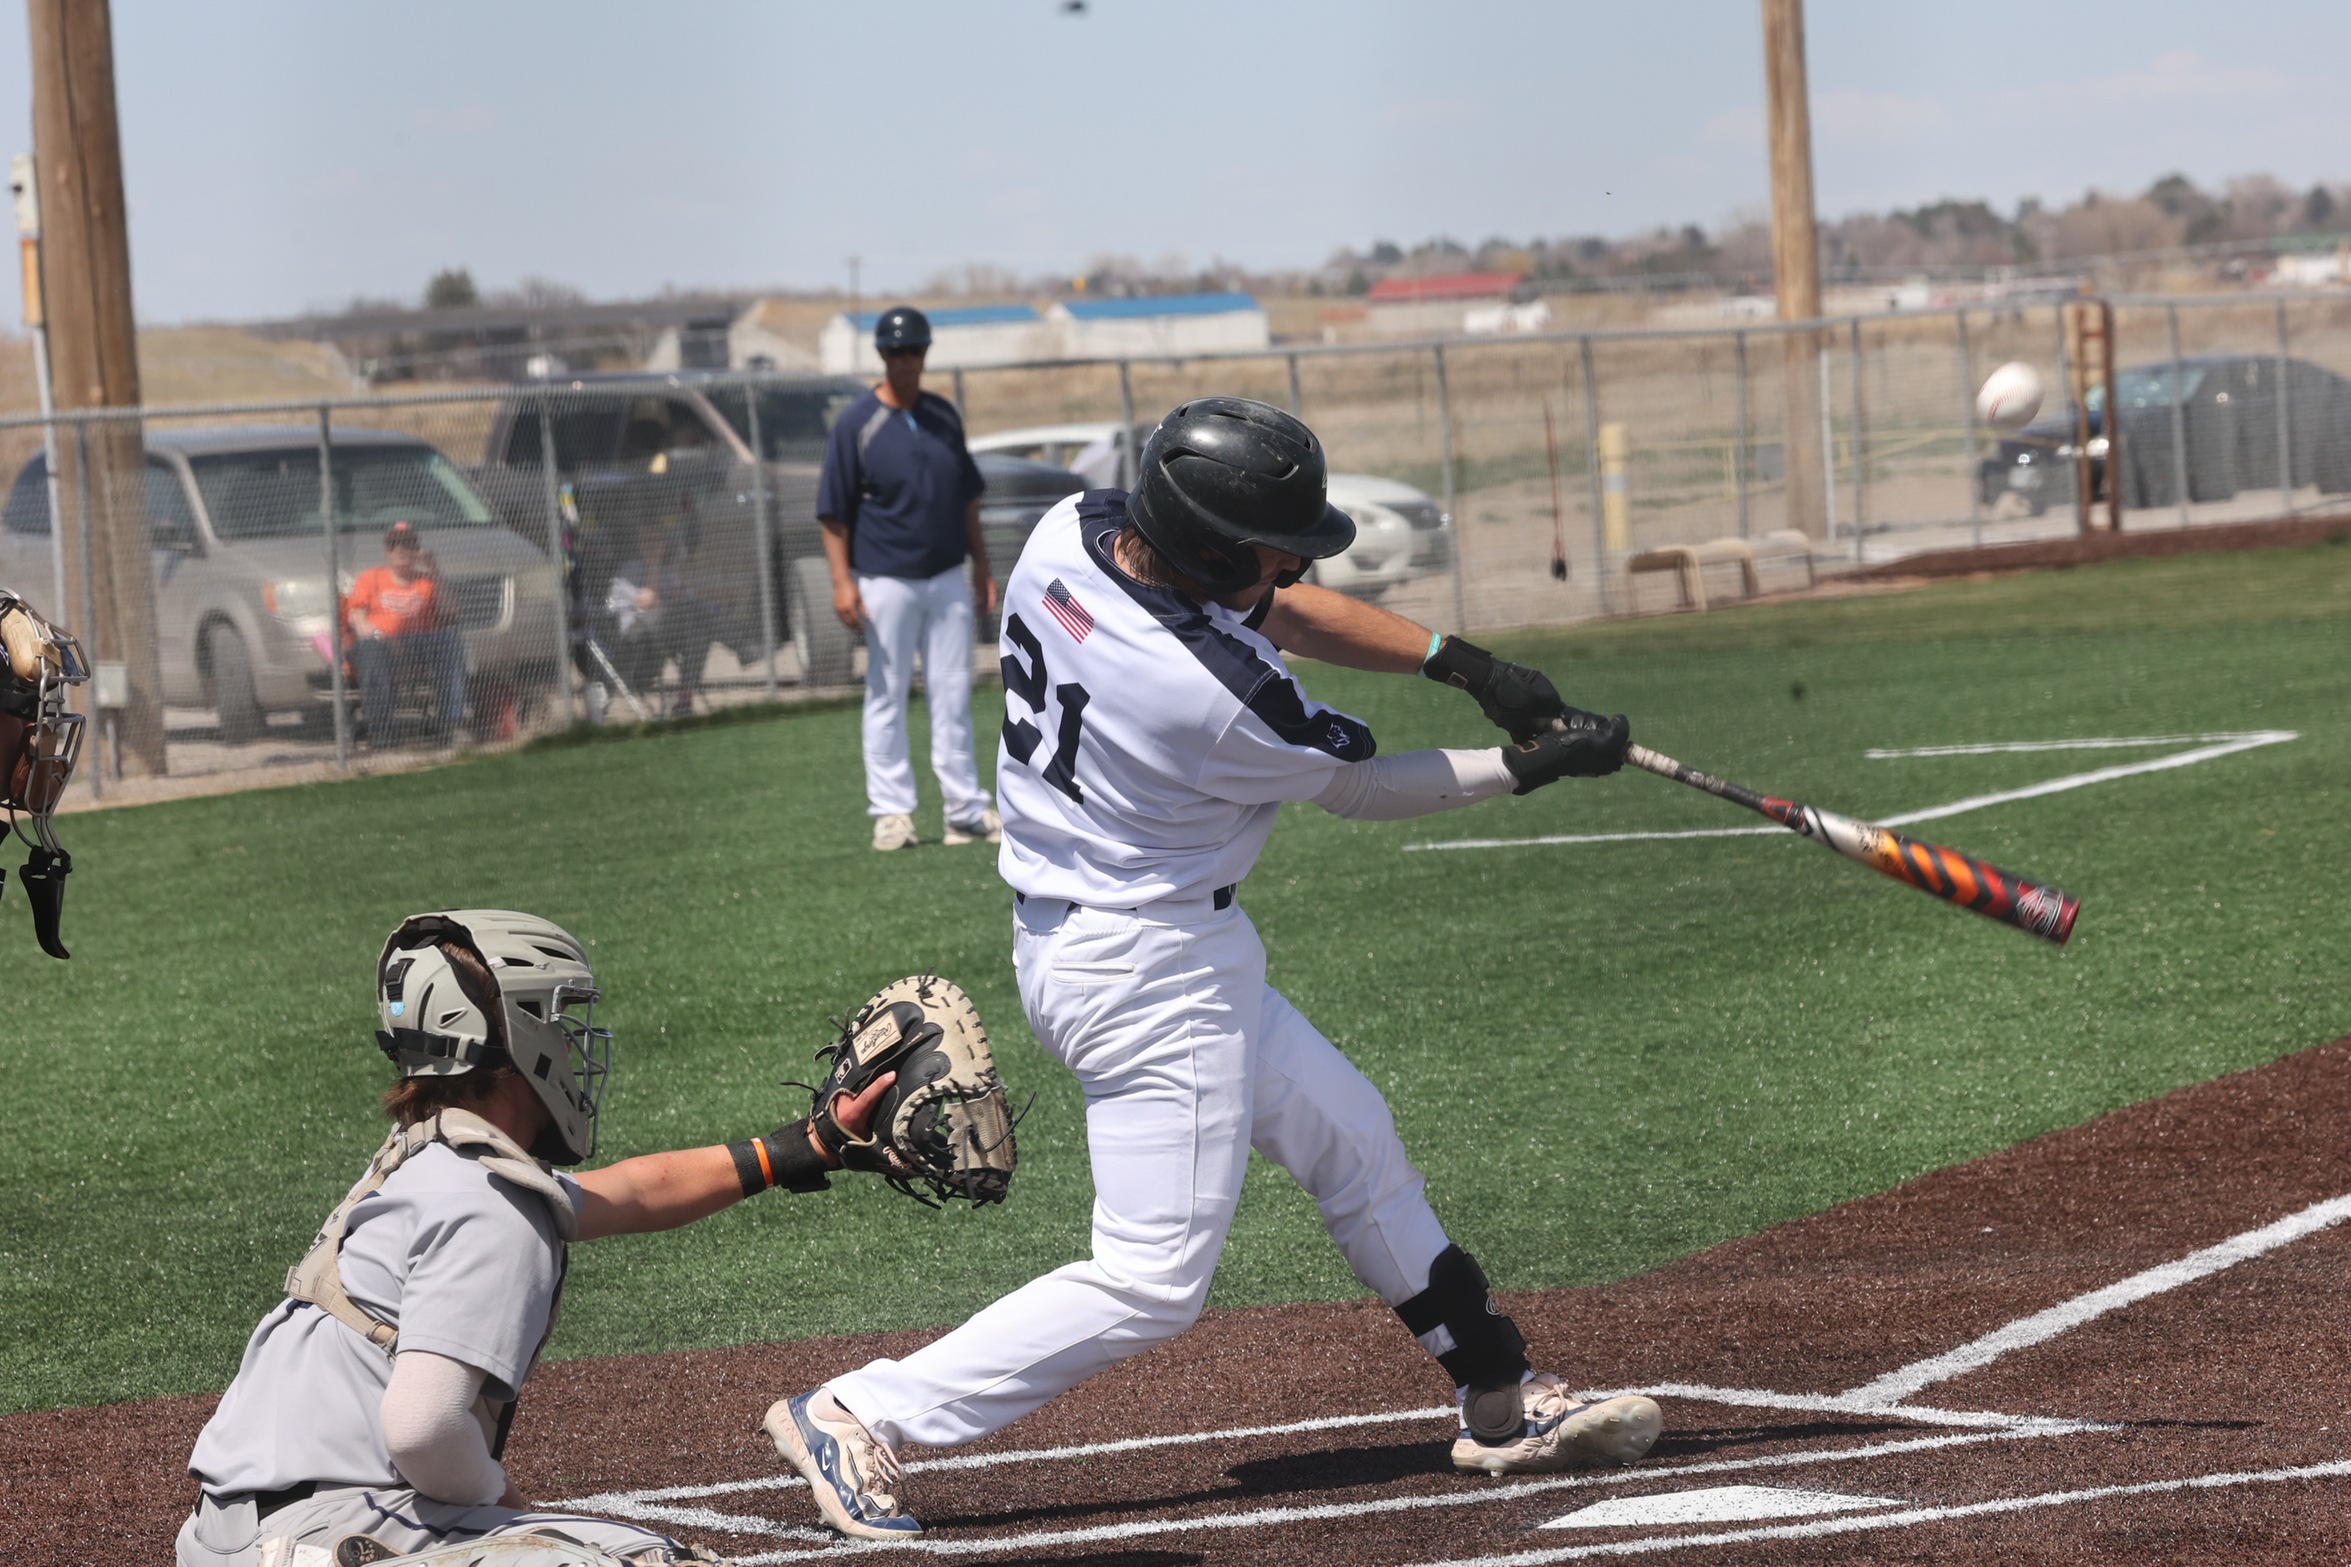 Tyler Easter goes for a hit in a game on Saturday against Otero